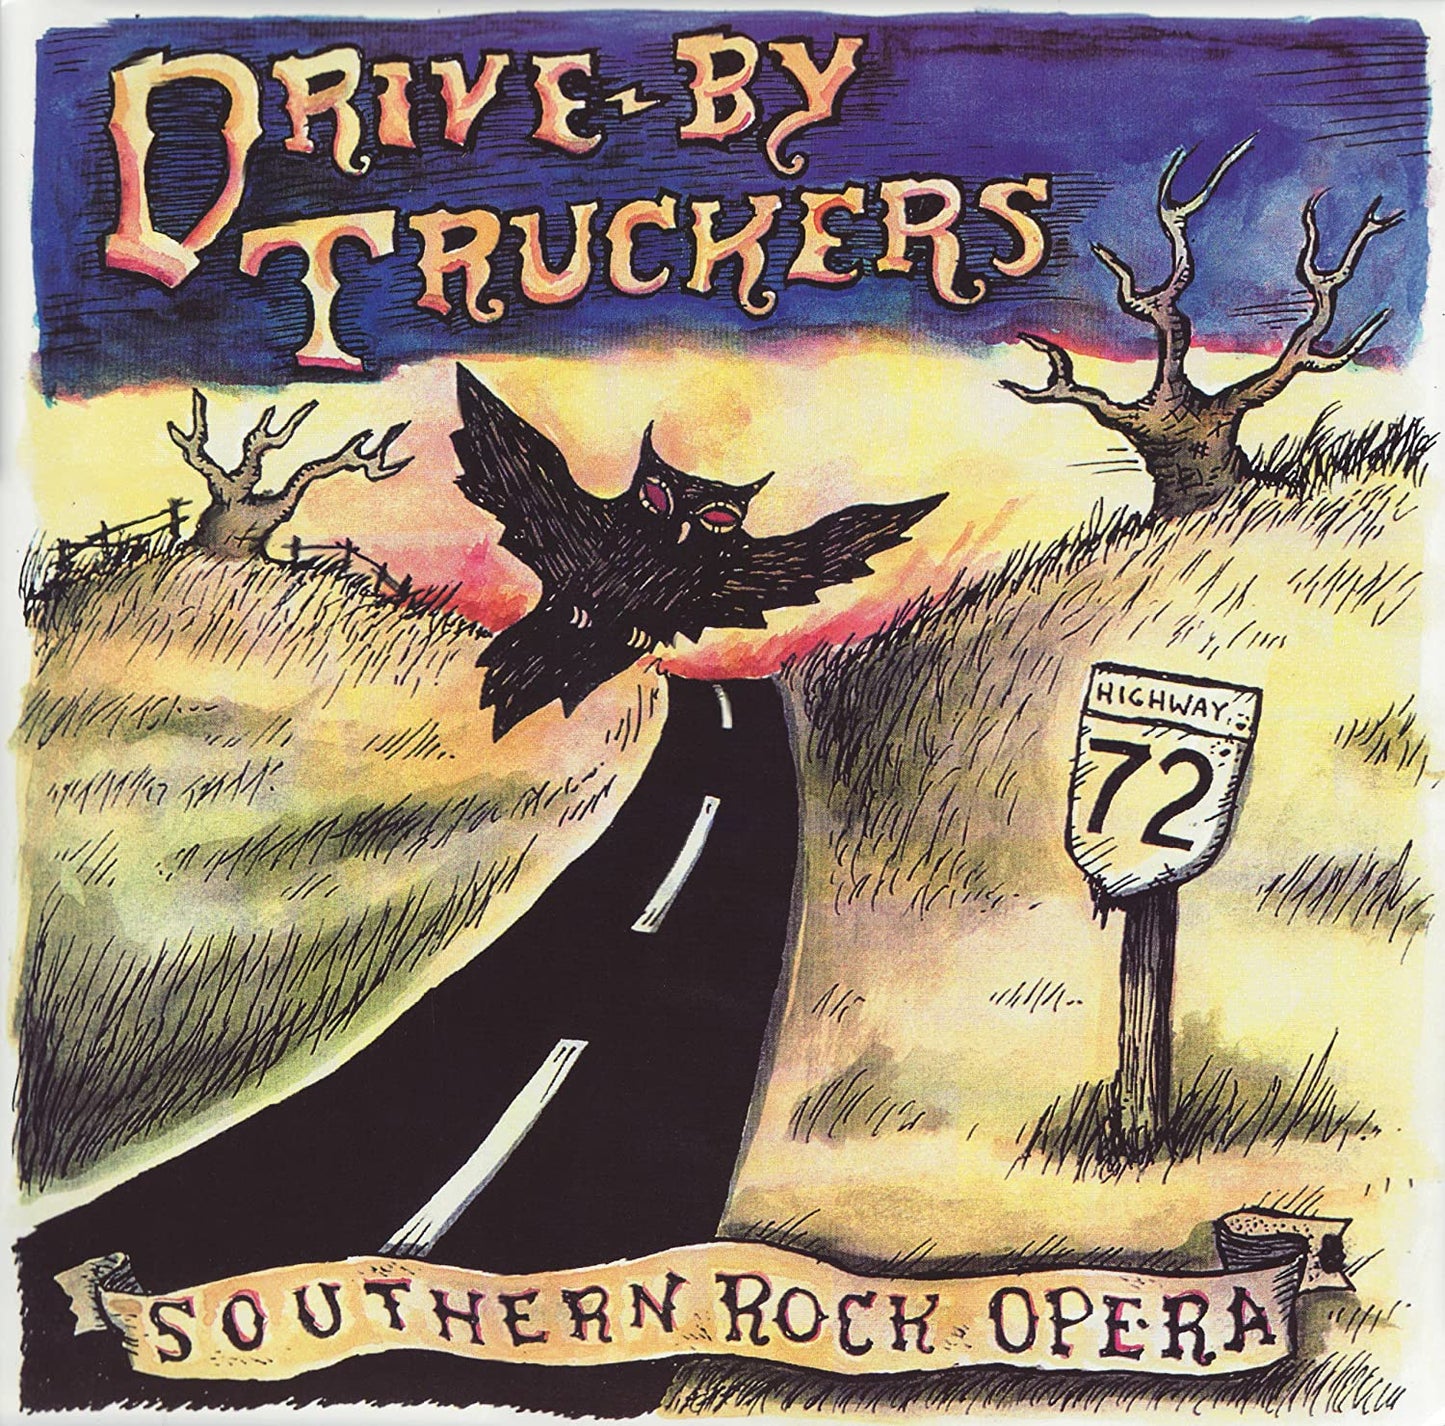 2LP - Drive By Truckers - Southern Rock Opera